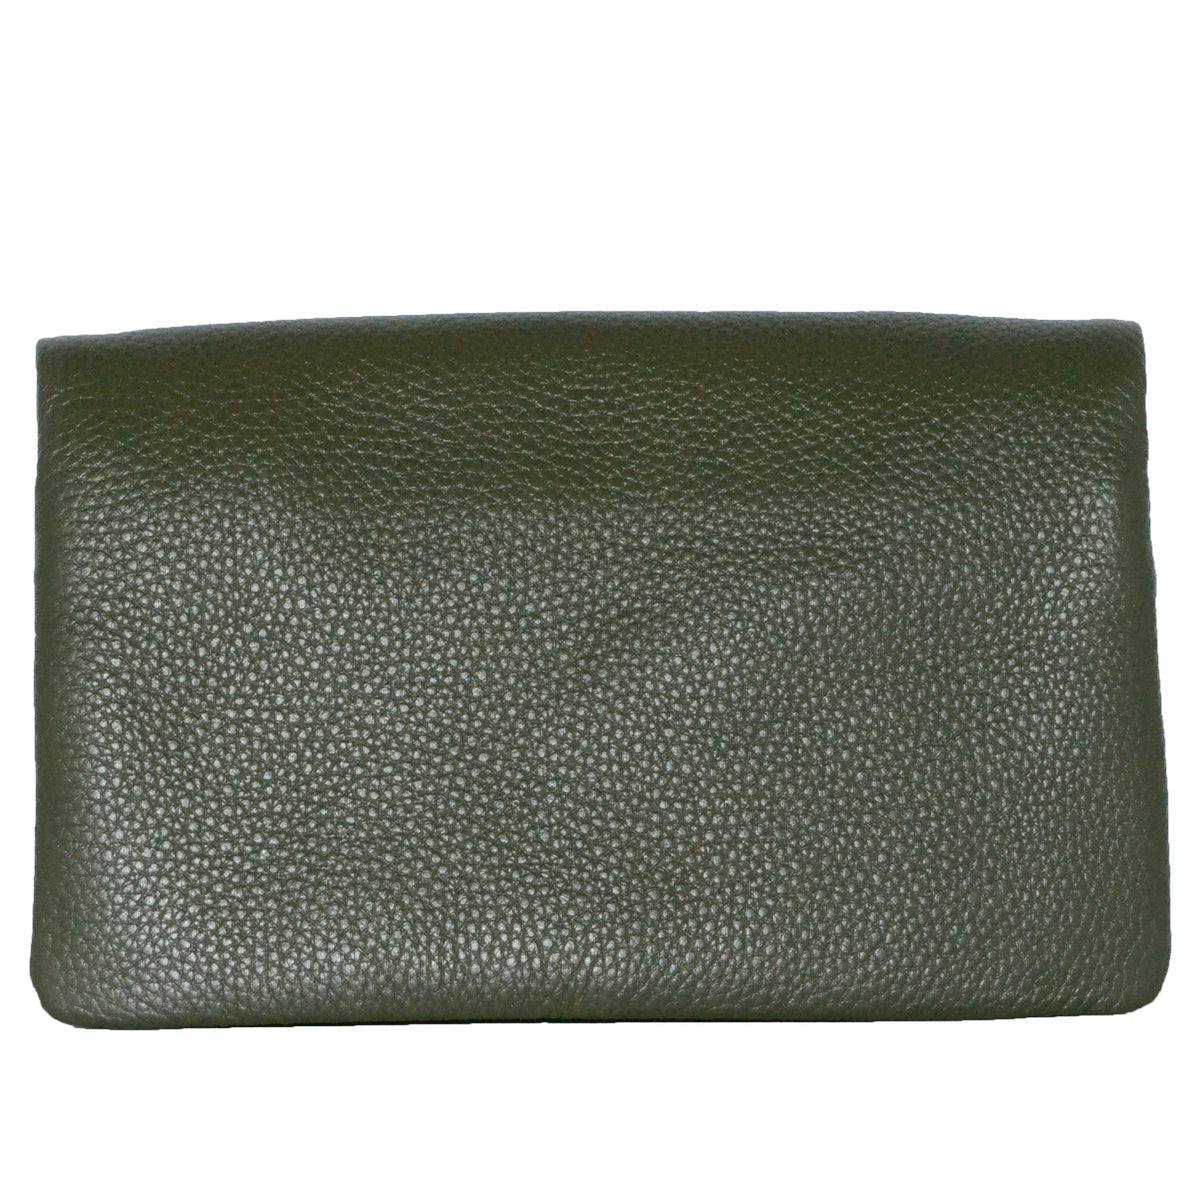 CREMORNE - Ladies Green Leather Fold Wallet Purse with Gold Hardware Wallets Addison Road